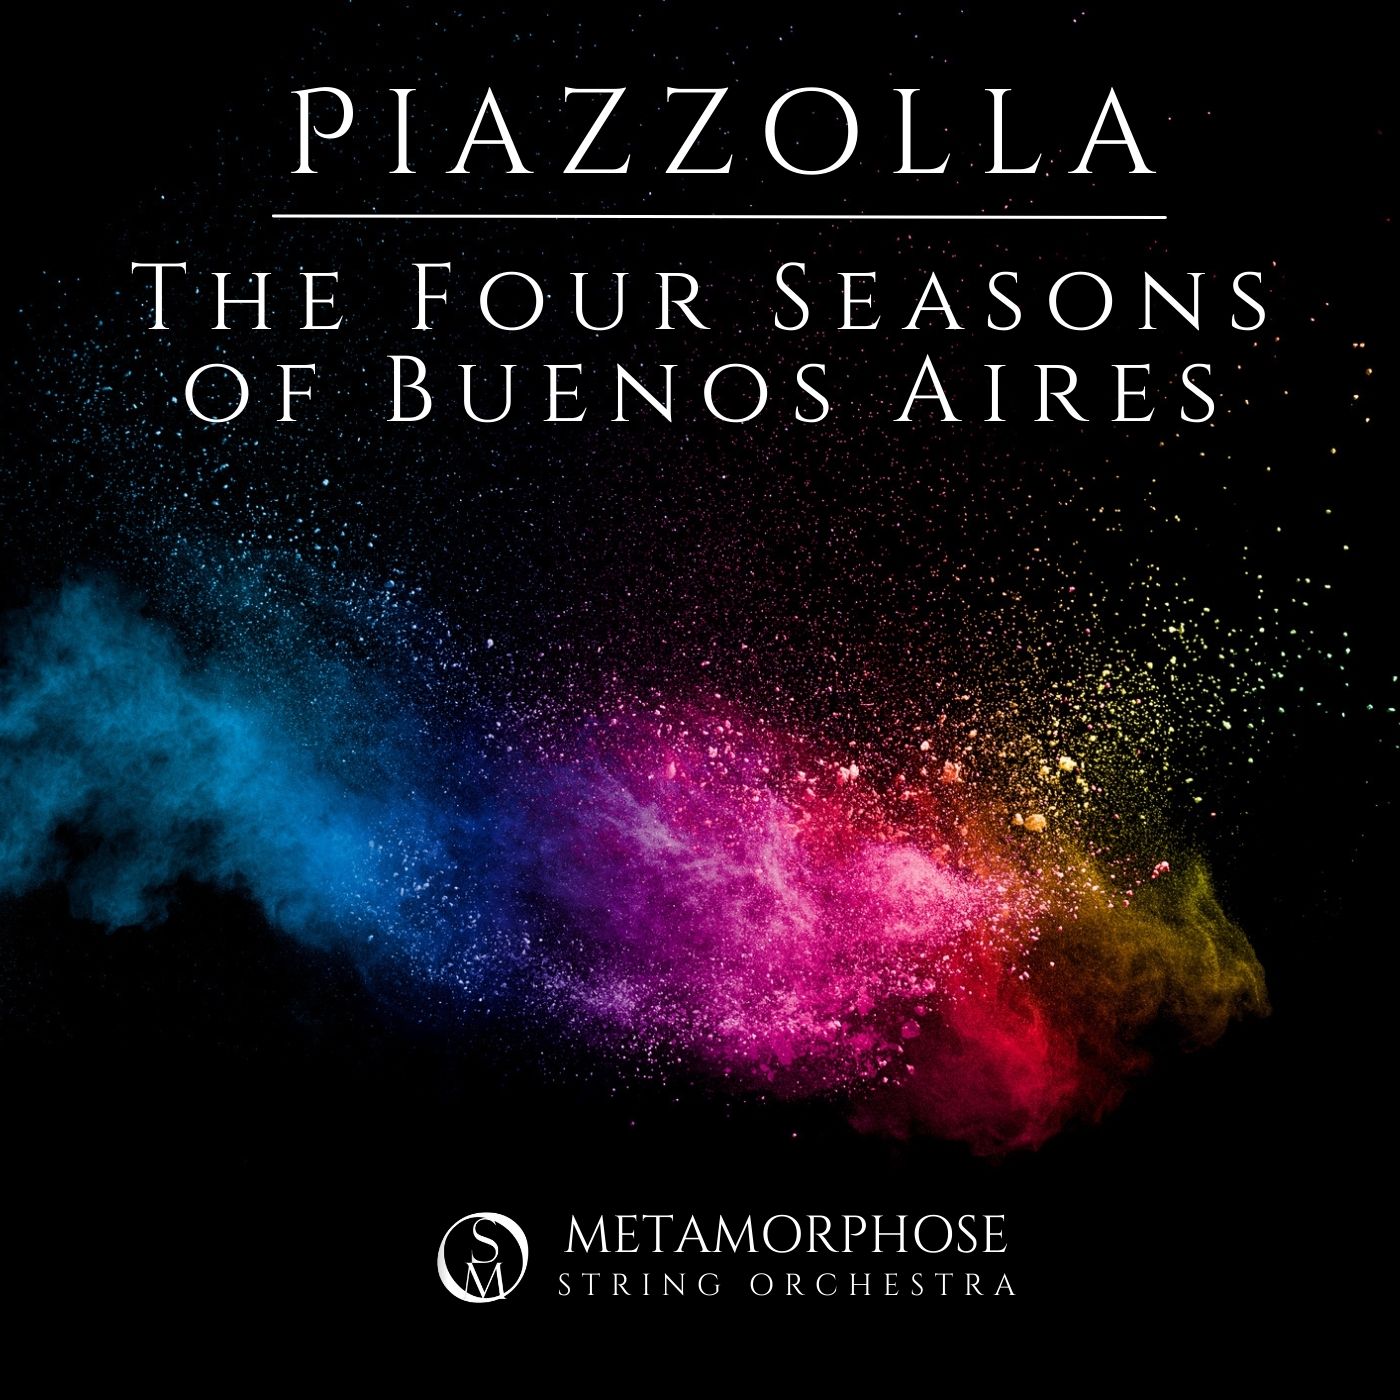 Piazzolla: The Four Seasons of Buenos Aires